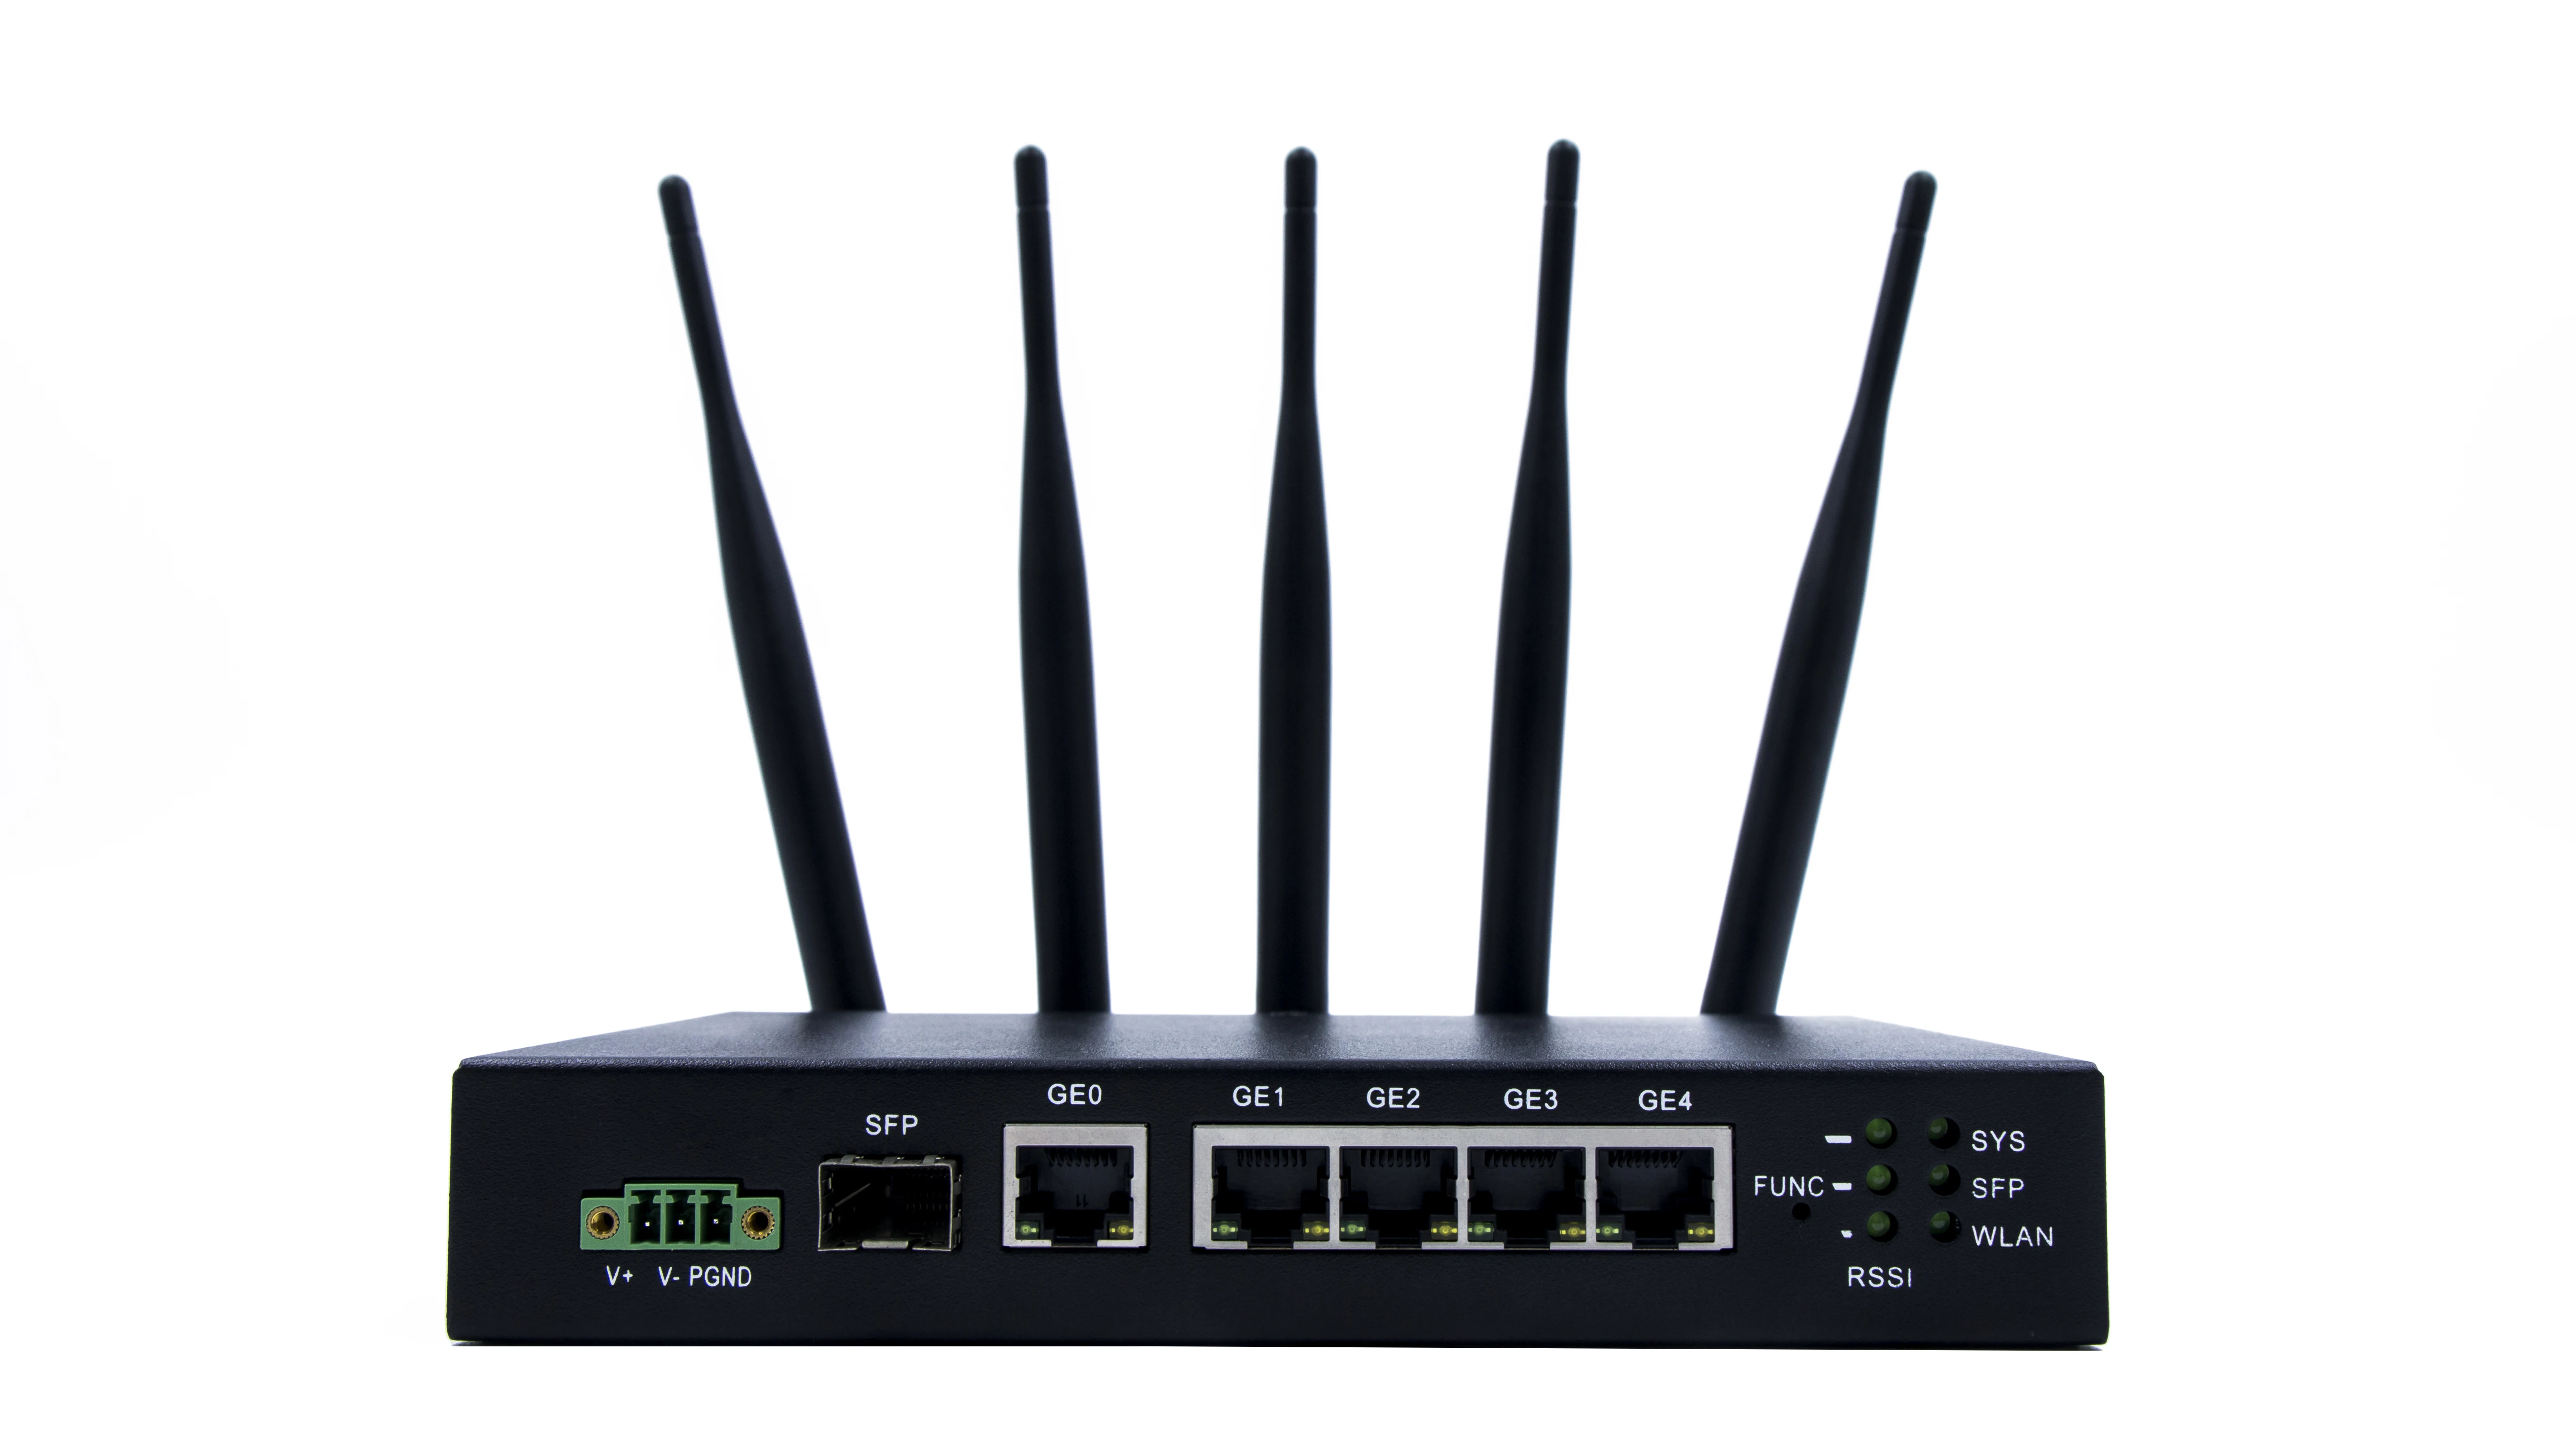 4g vpn. 6g WIFI Router. Wi-Fi Router RX-23302. 45 LTE Wi Fi Rotor narxi.